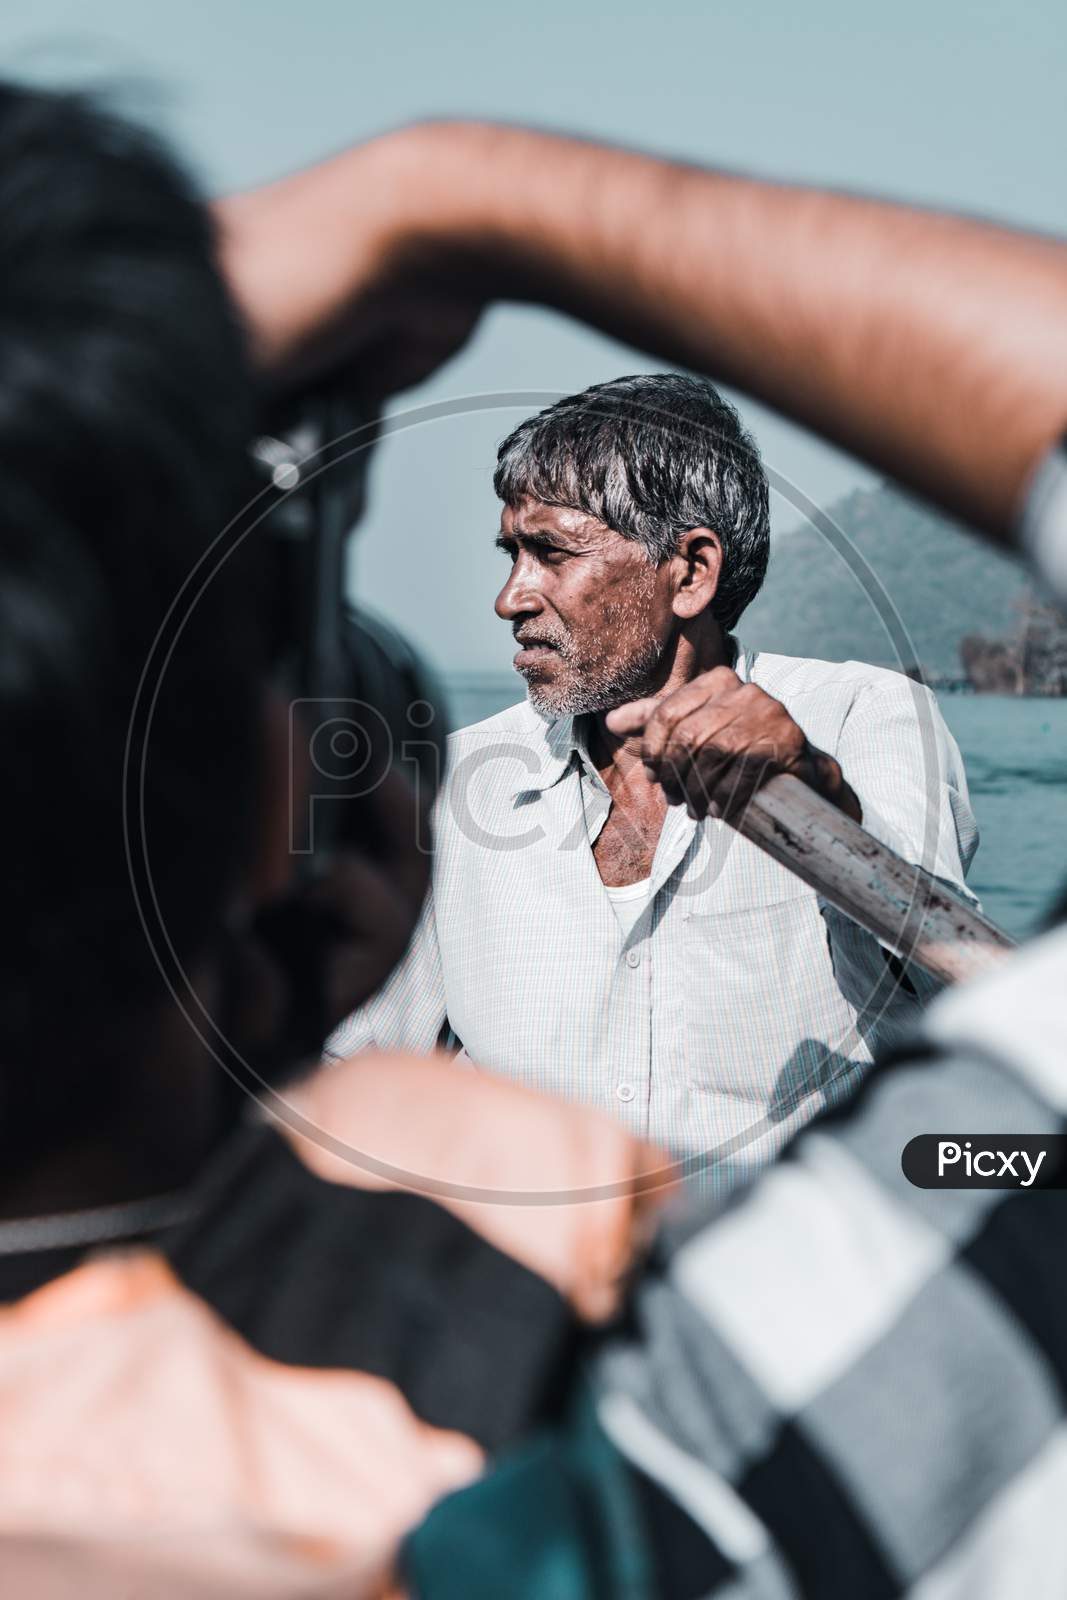 PICTURE OF A BOATMAN BEING PHOTOGRAPHED BY A PHOTOGRAPHER